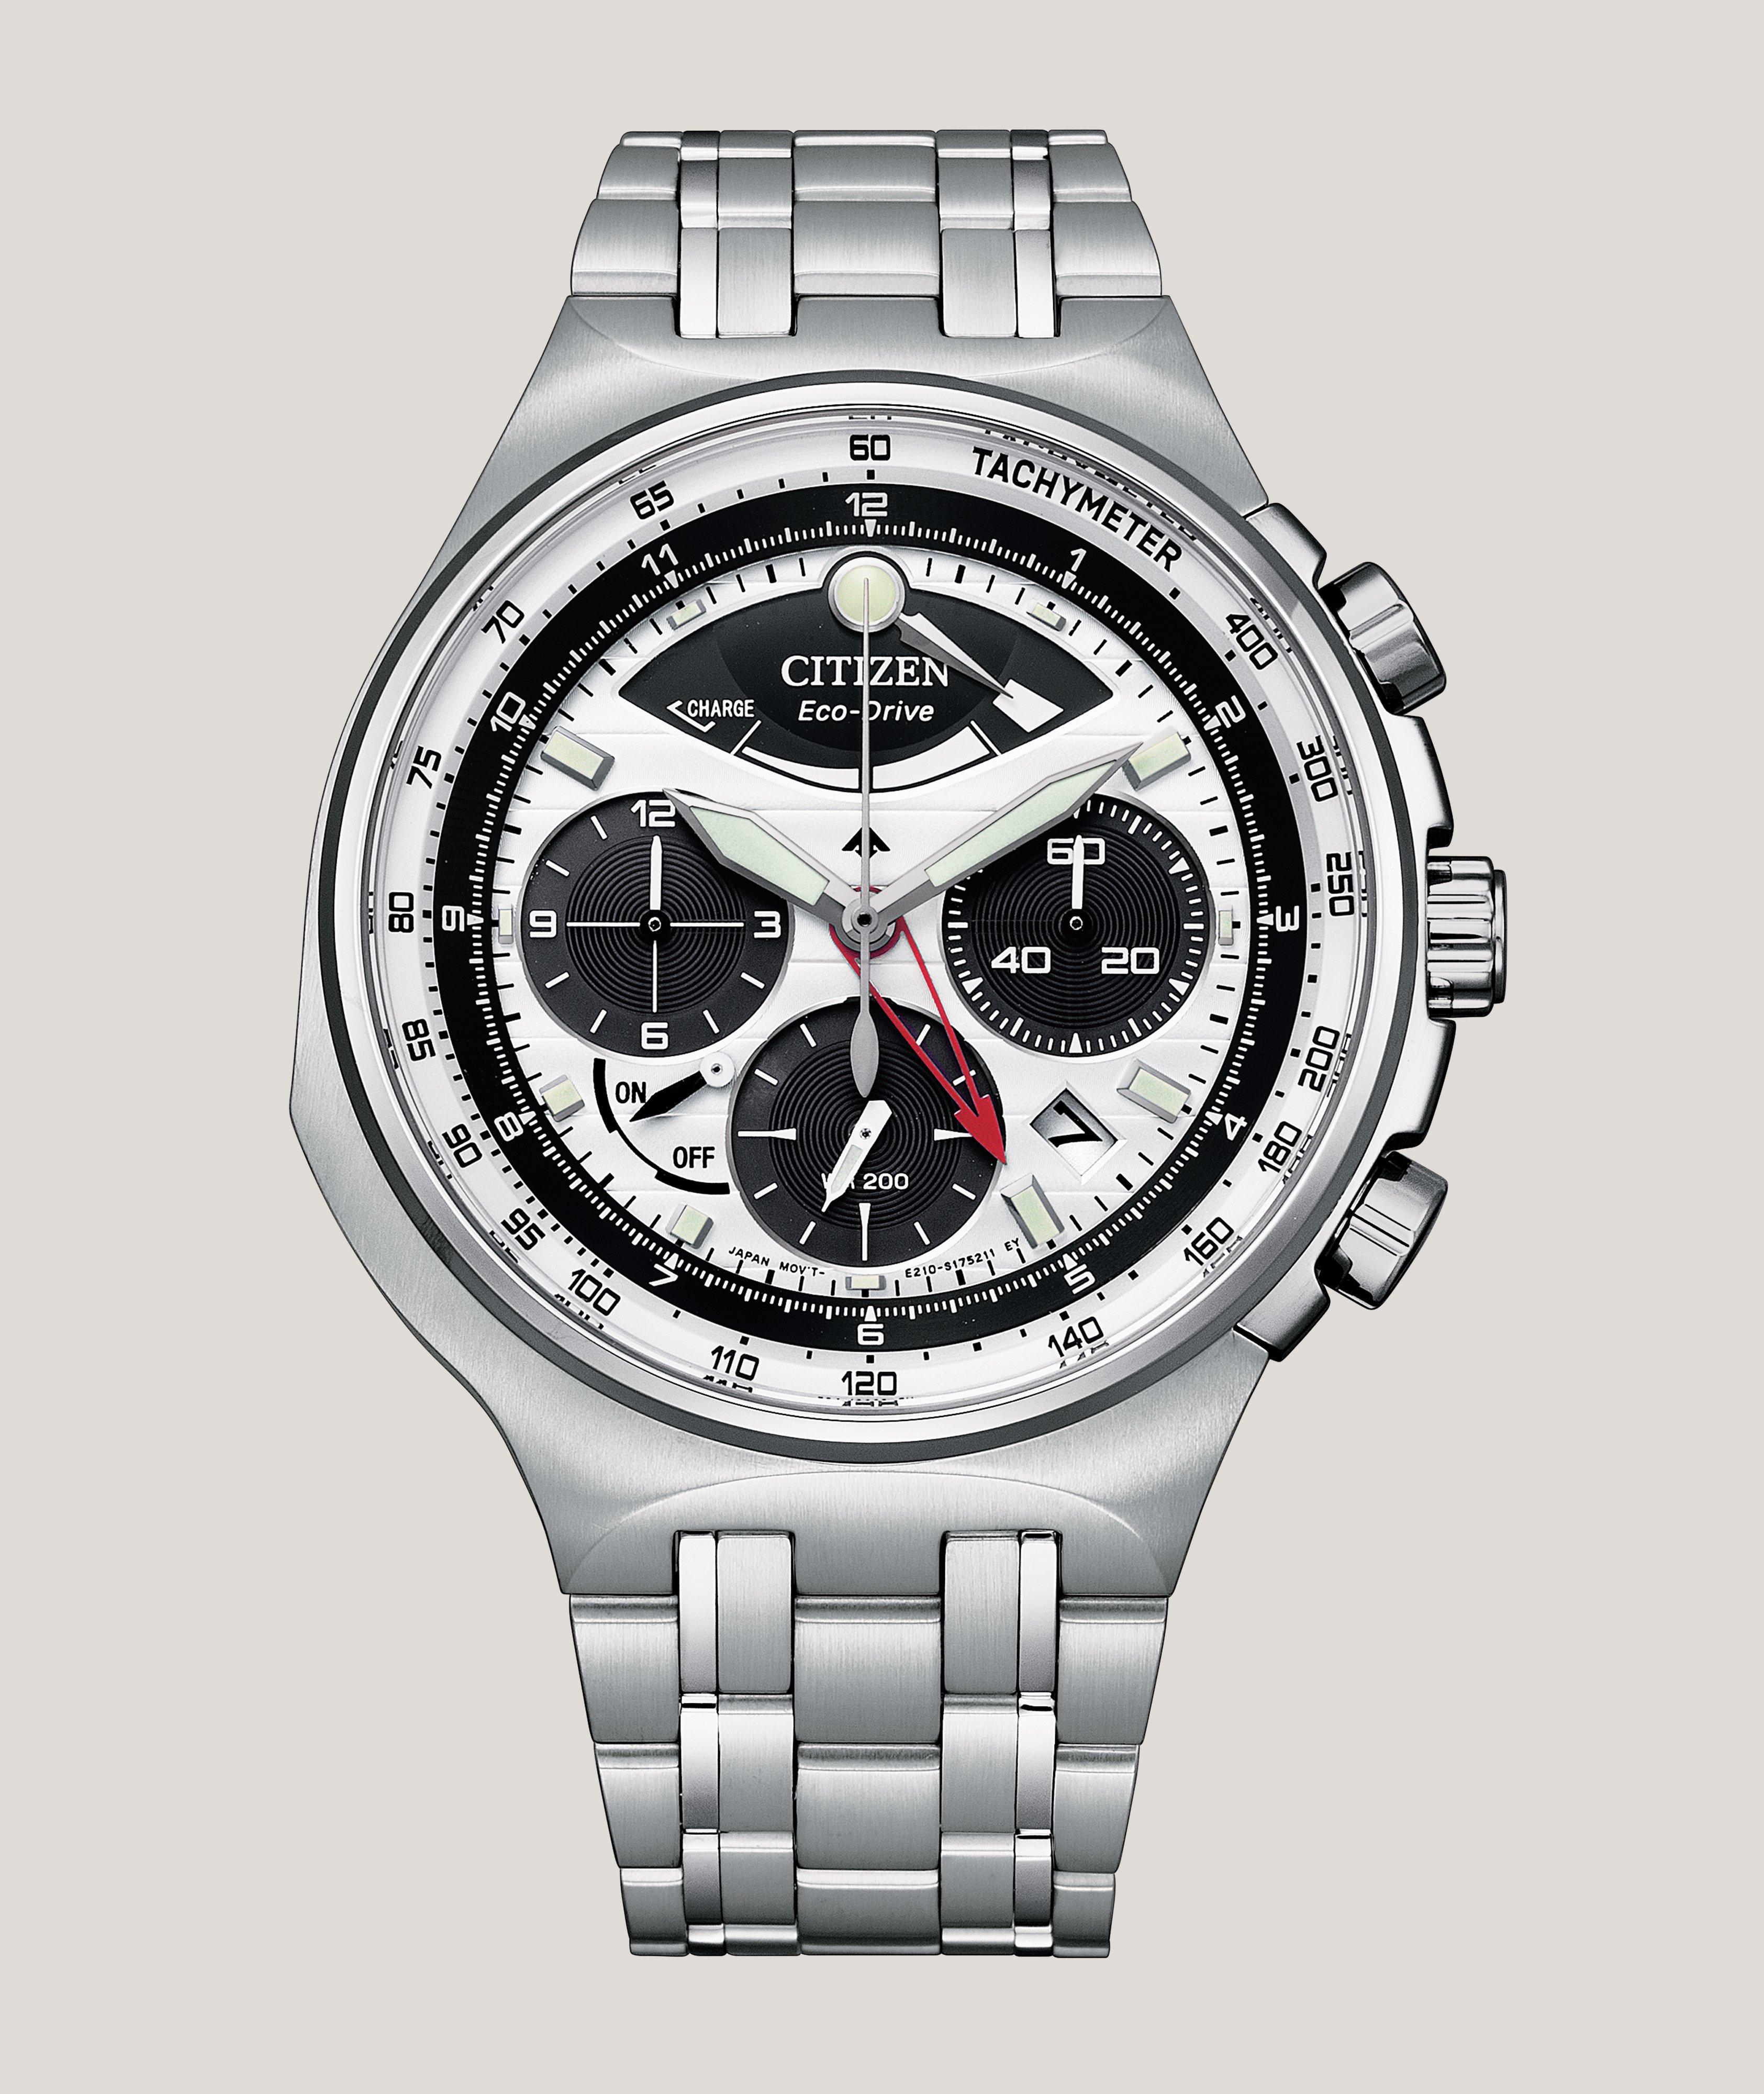  Limited Edition Caliber 2100 Eco-Drive Watch image 0